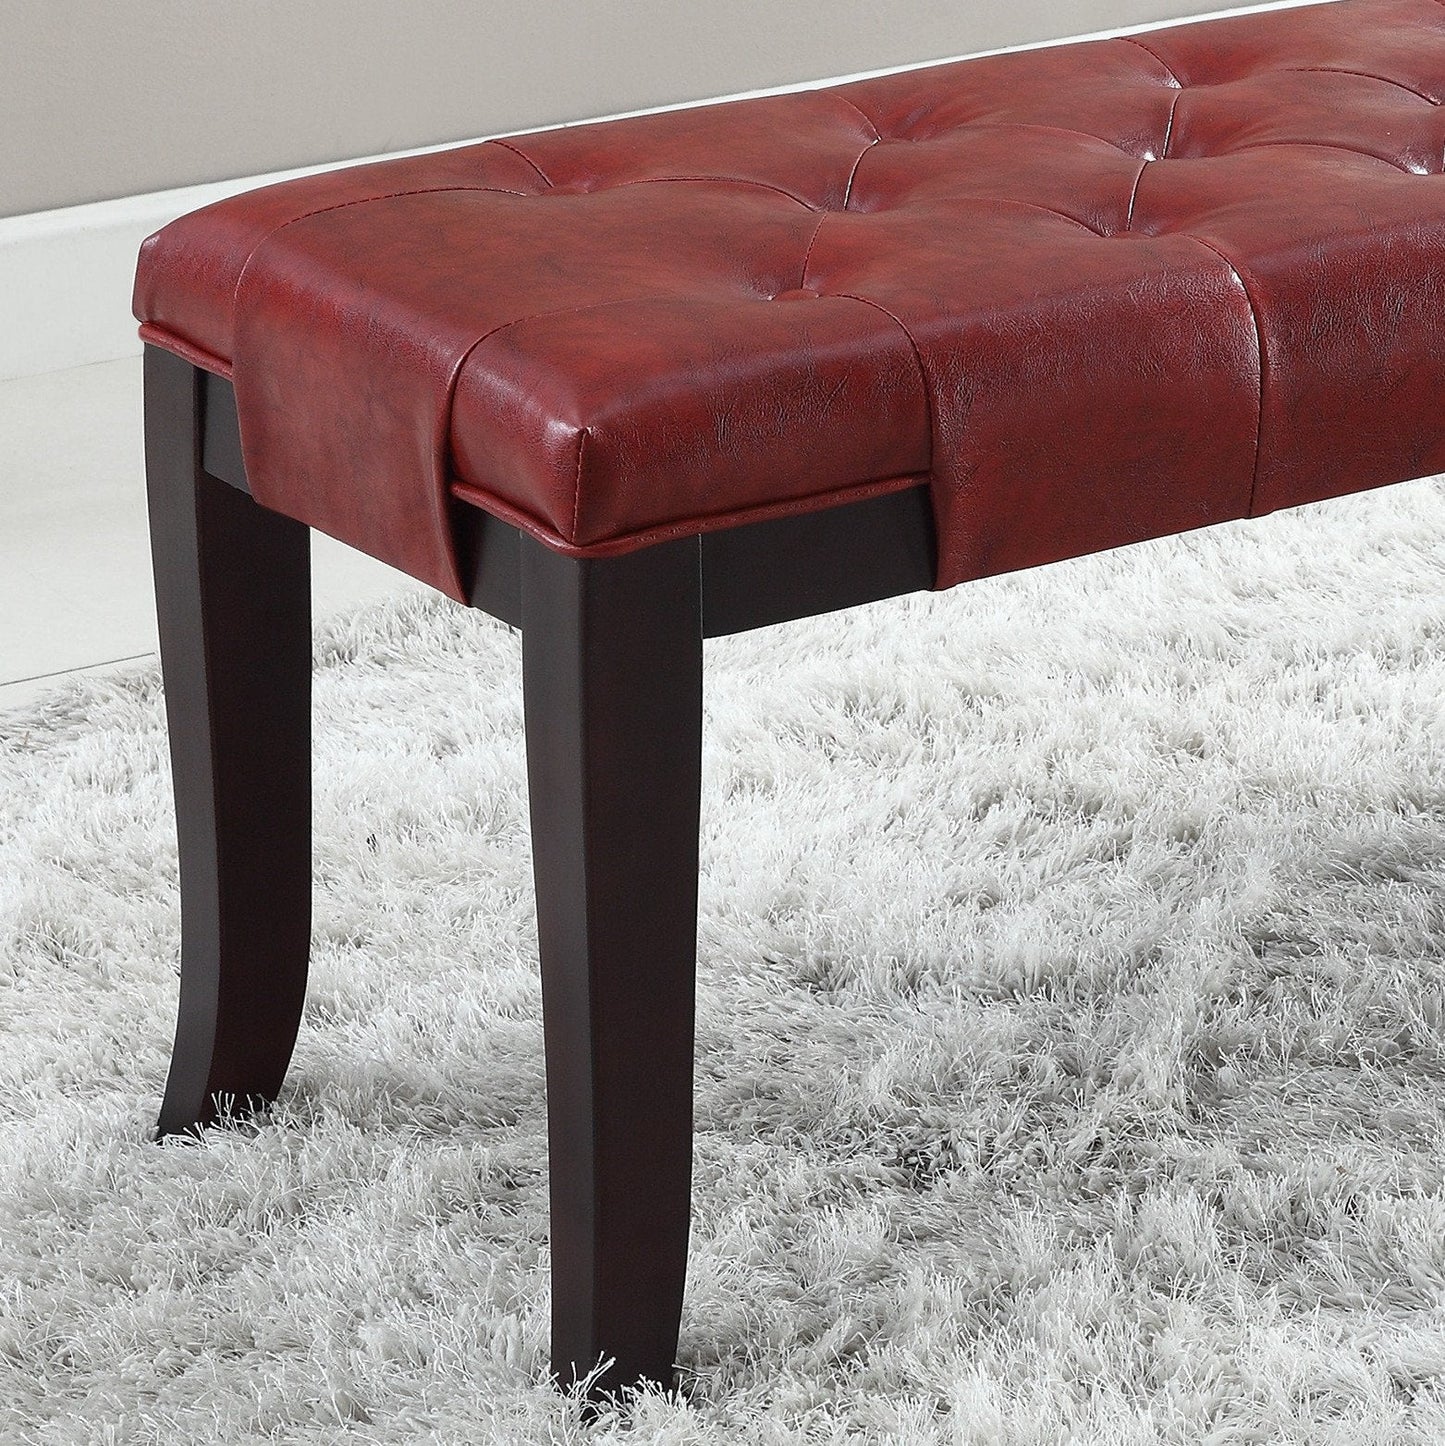 Linon Red Leather Tufted Ottoman Bench